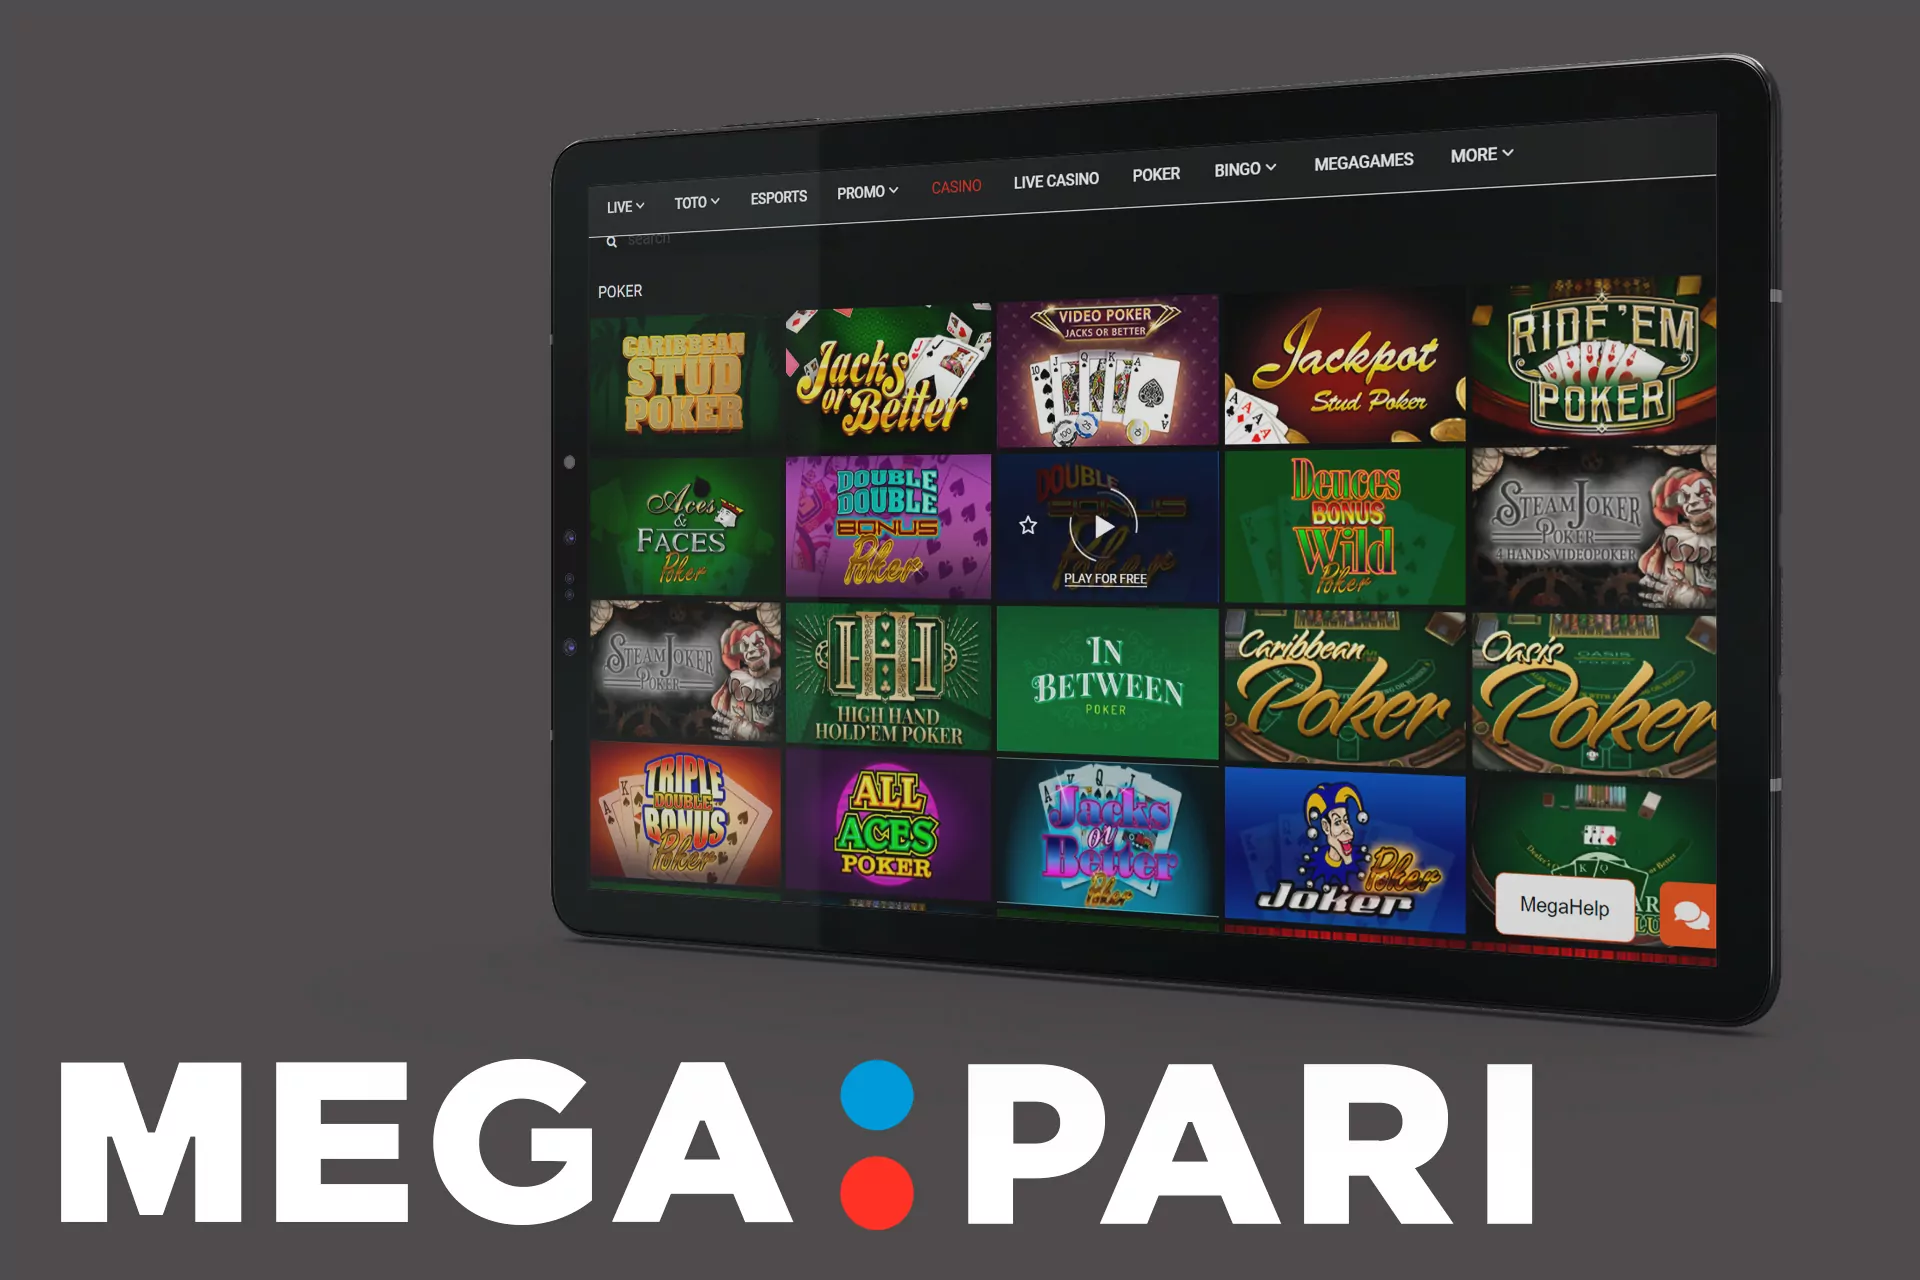 Play table games from well-known providers at the Megapari casino.